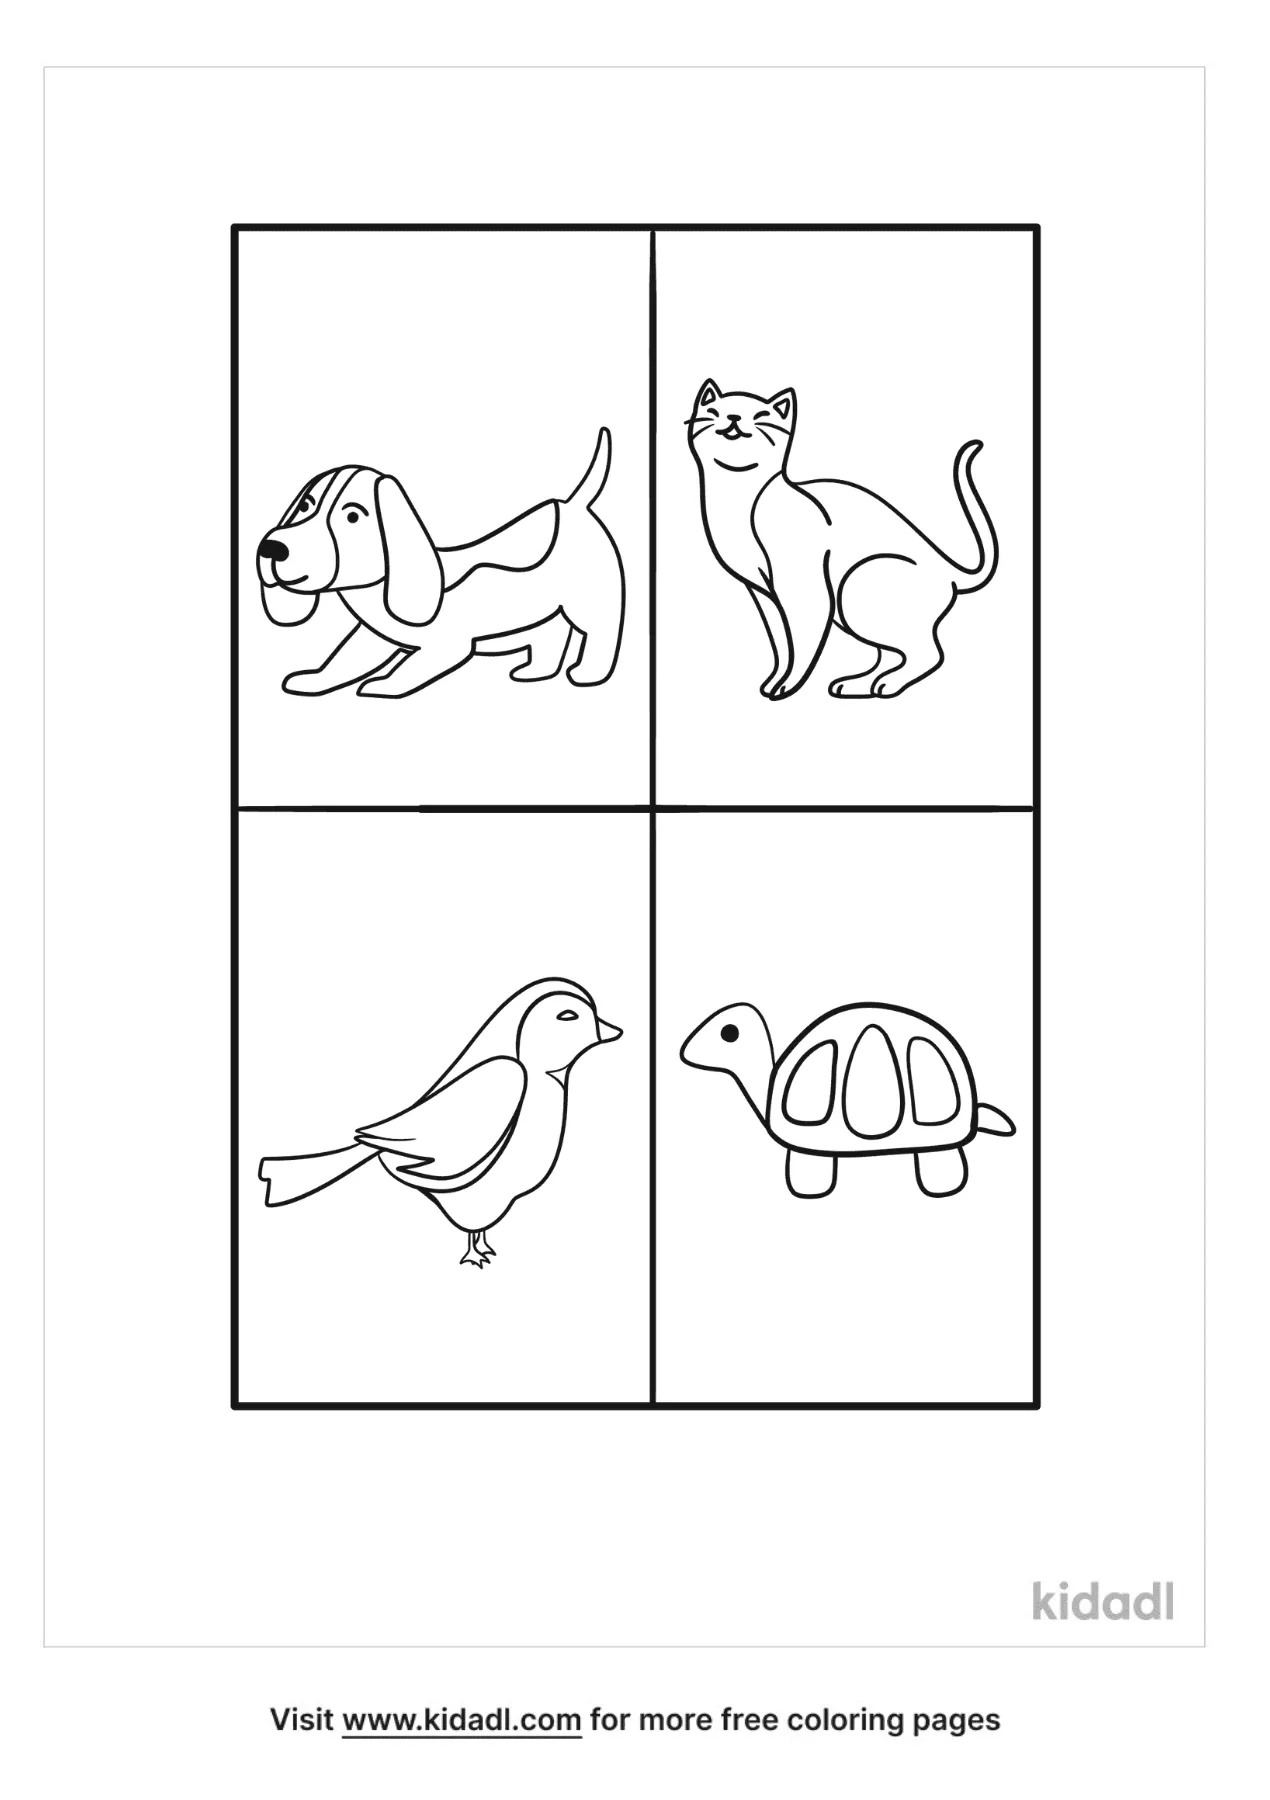 Free Pet Collage Coloring Page | Coloring Page Printables | Kidadl